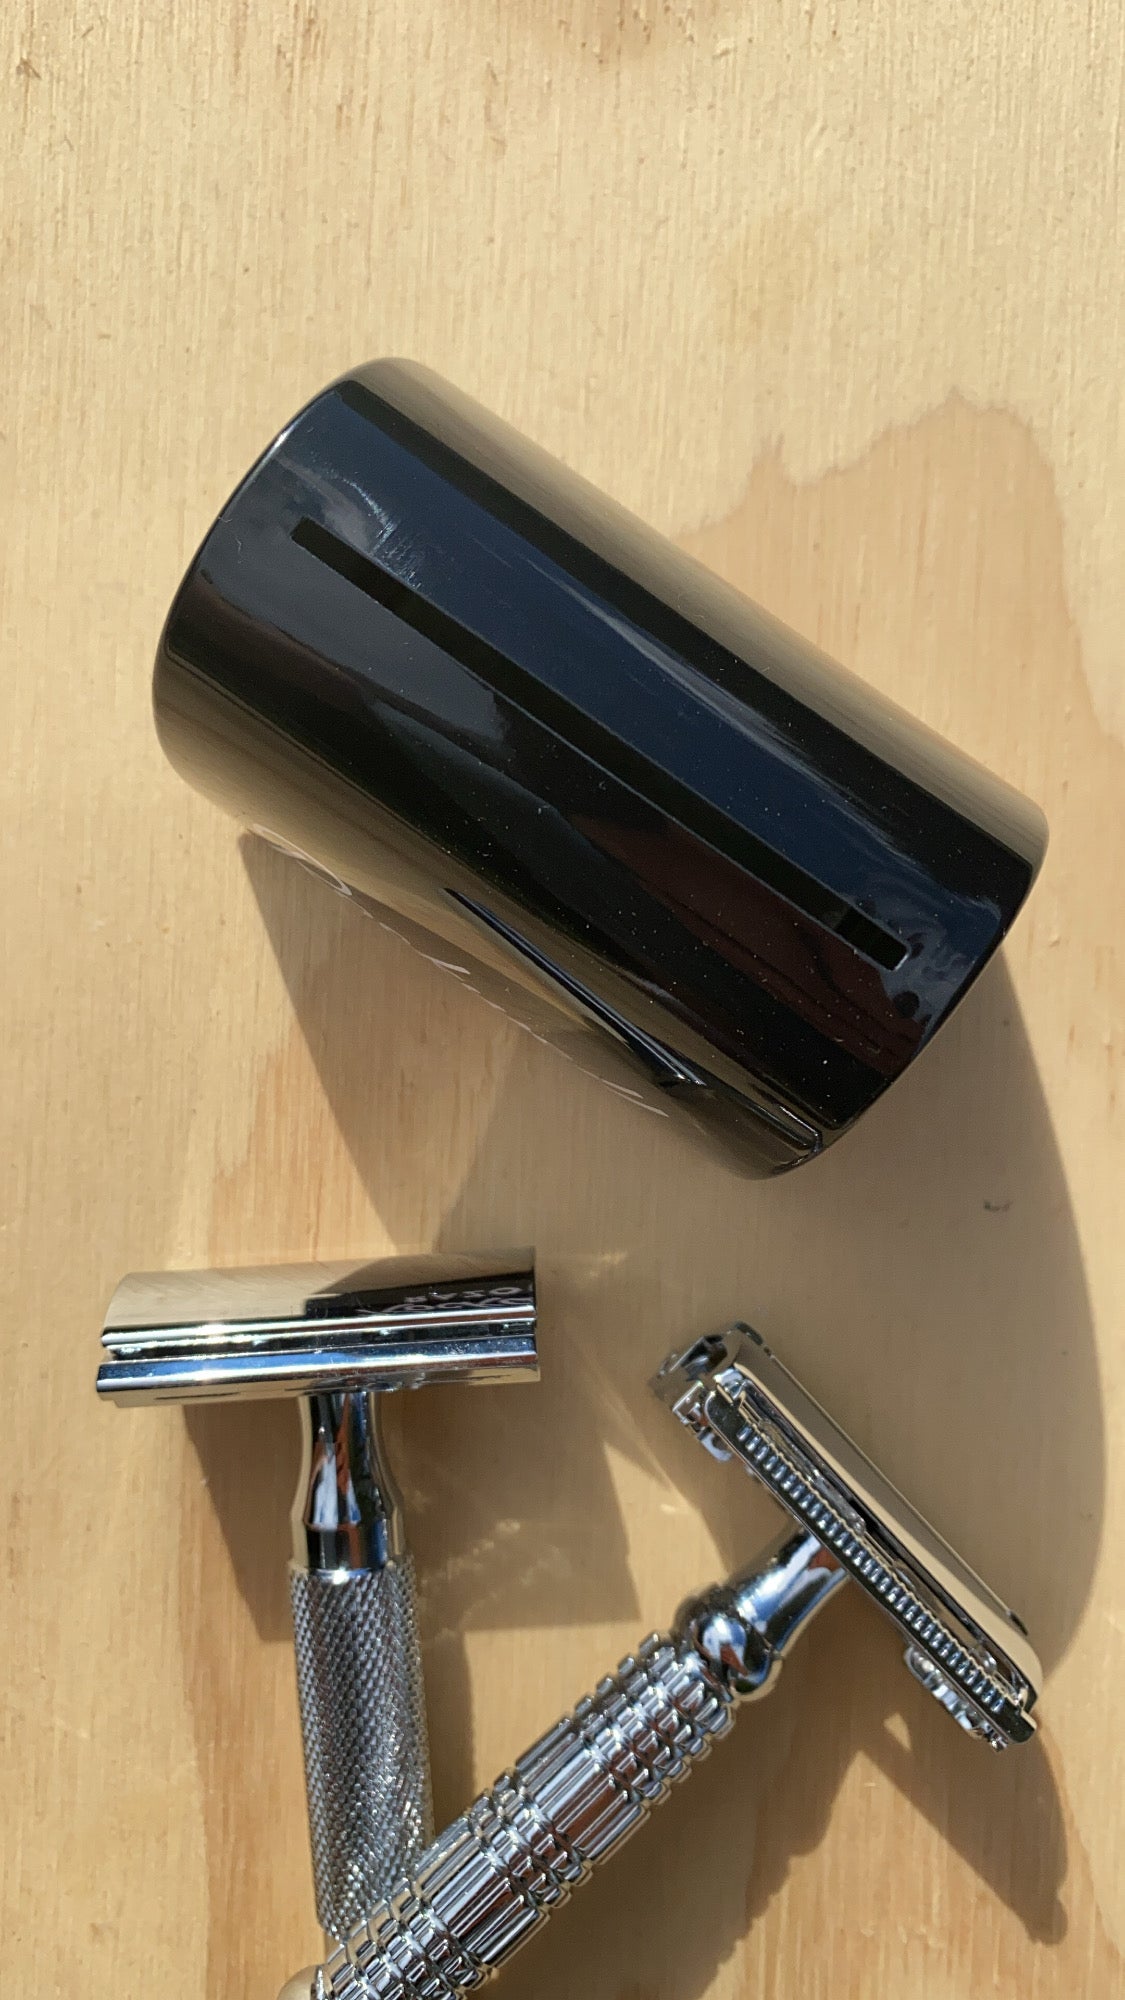 Blade Bank for Safety Razors